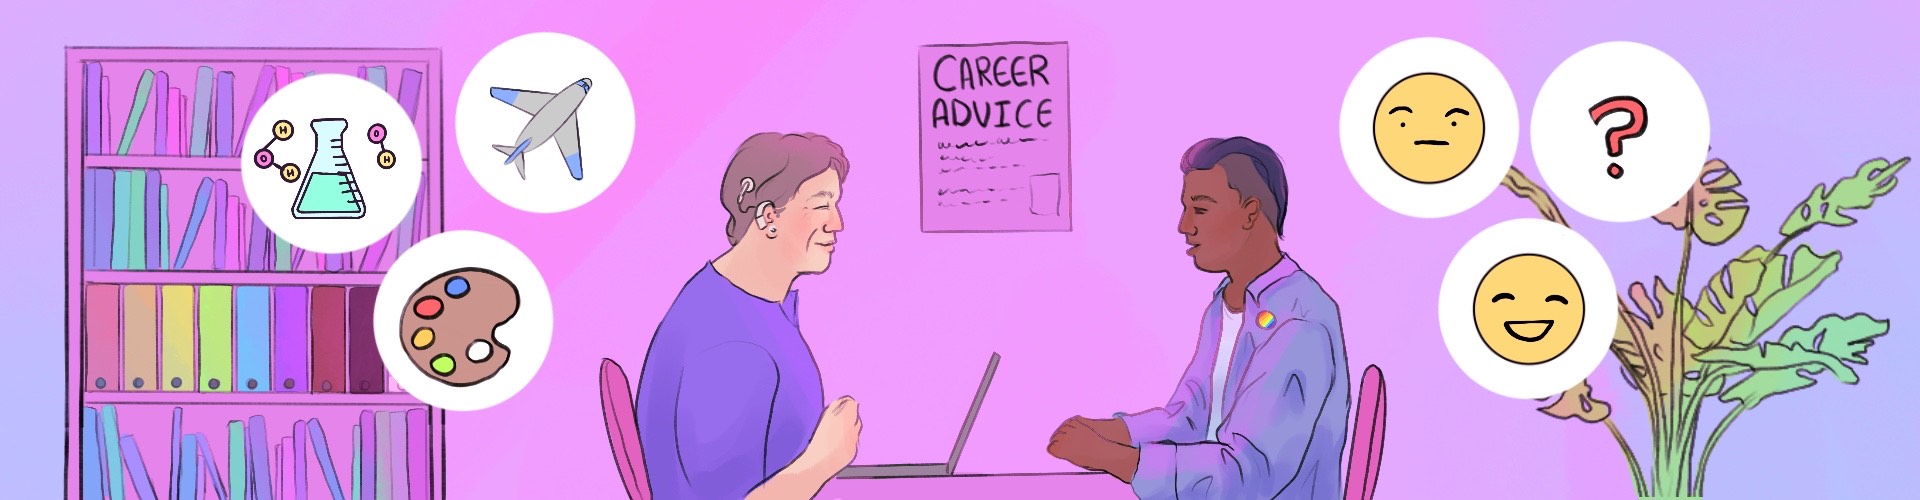 A colourful illustration of a queer young person is in a careers advice meeting with an adult. The young person is unsure, and the adult is suggesting some different career options.